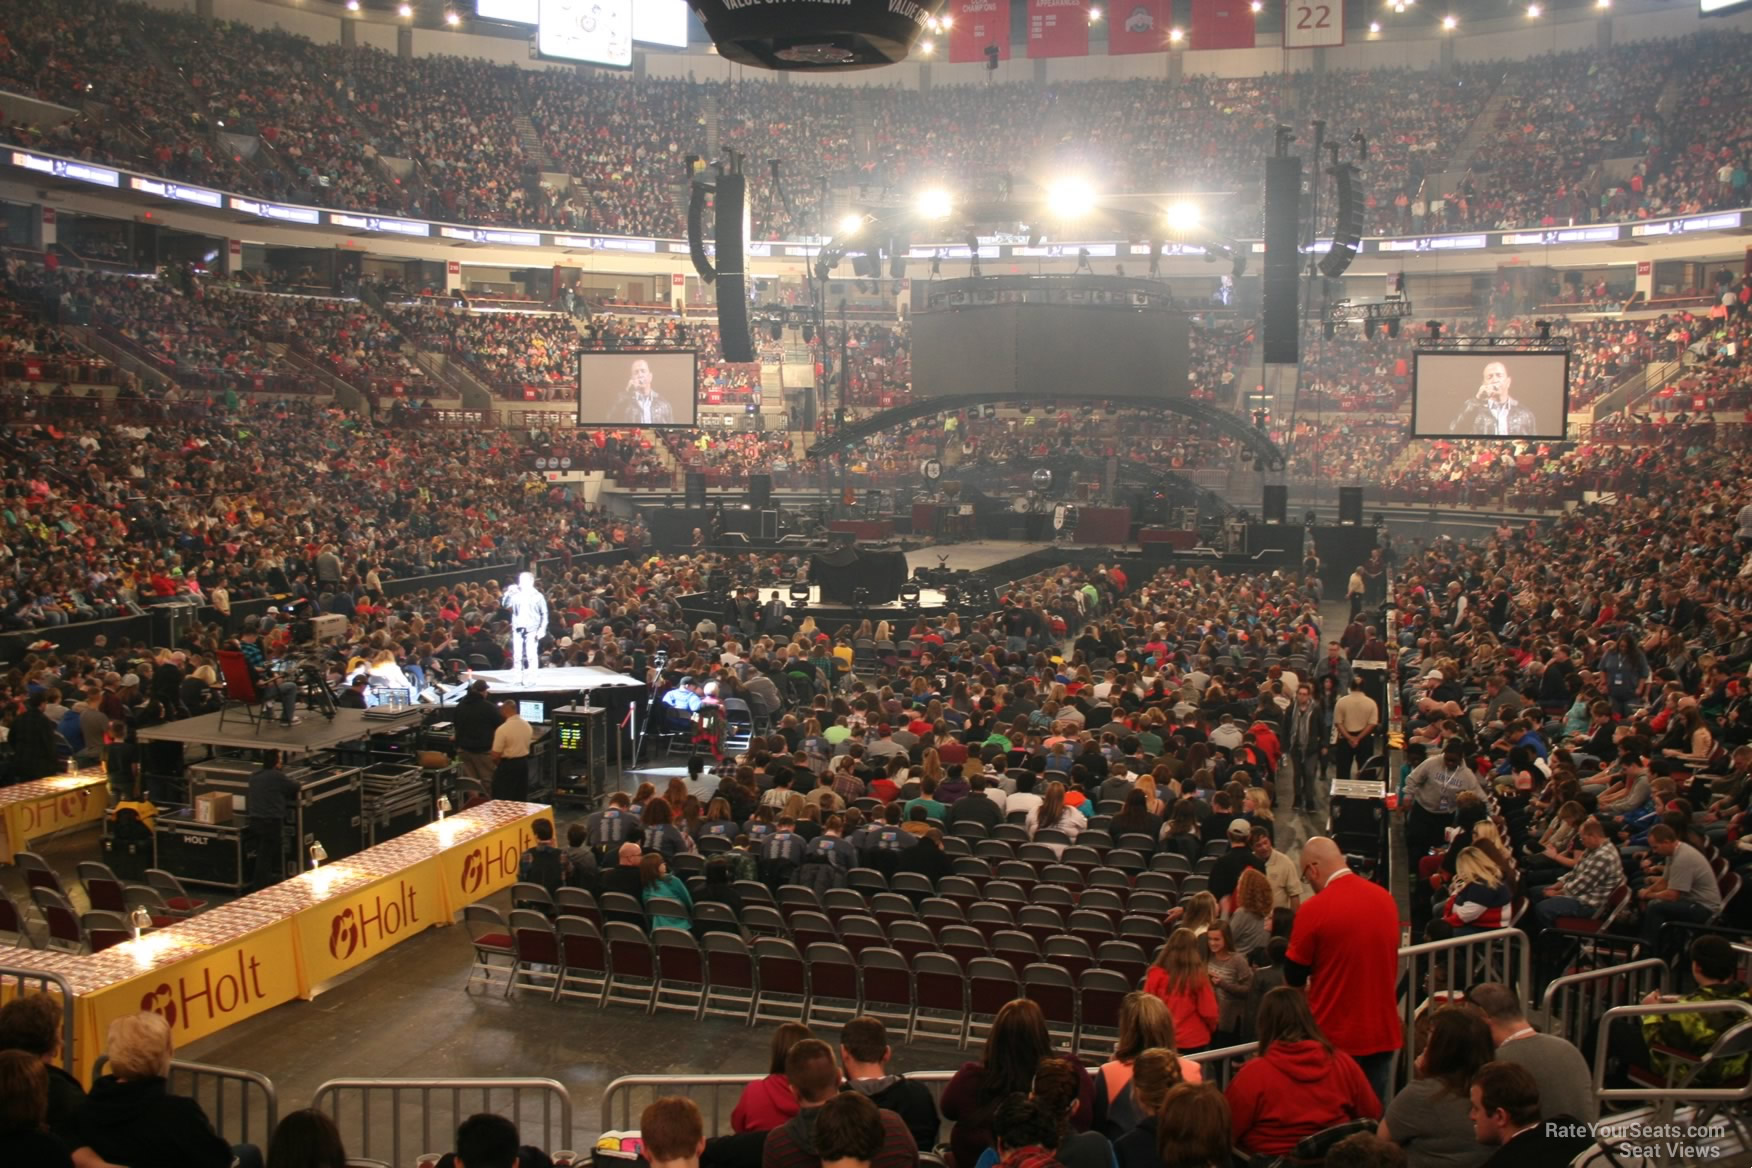 section 128, row h seat view  for concert - schottenstein center